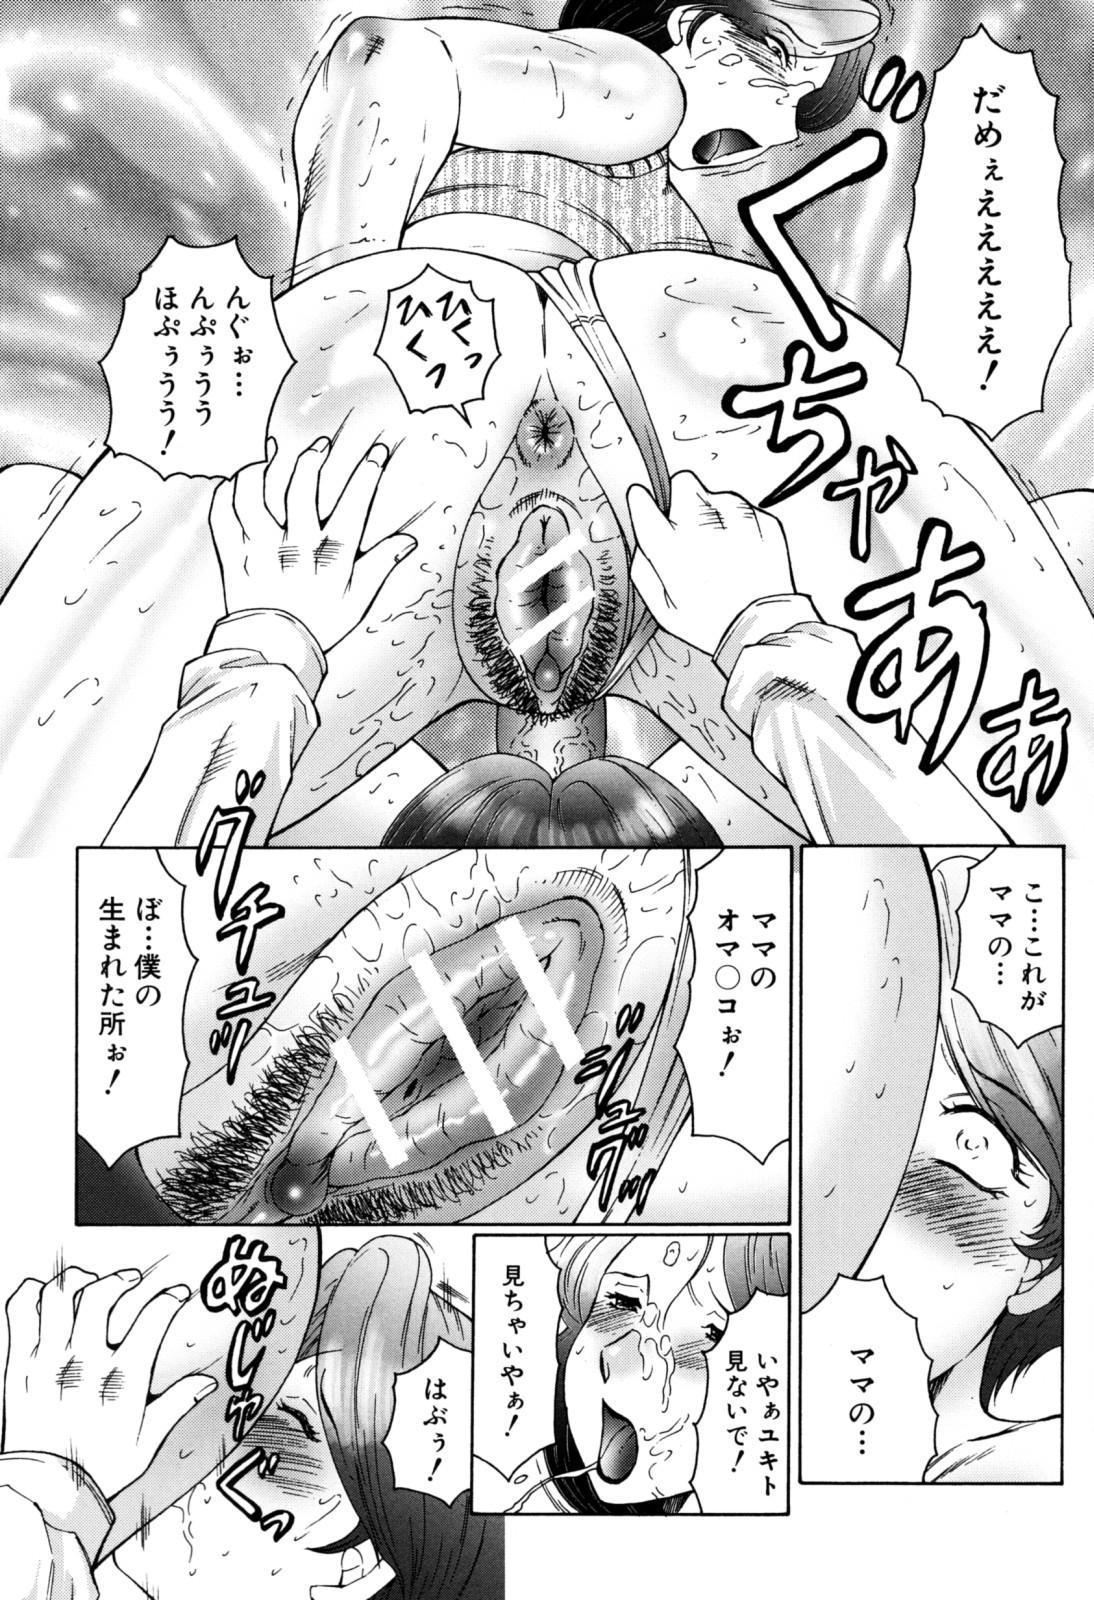 Boshino Toriko - The Captive of Mother and the Son 53